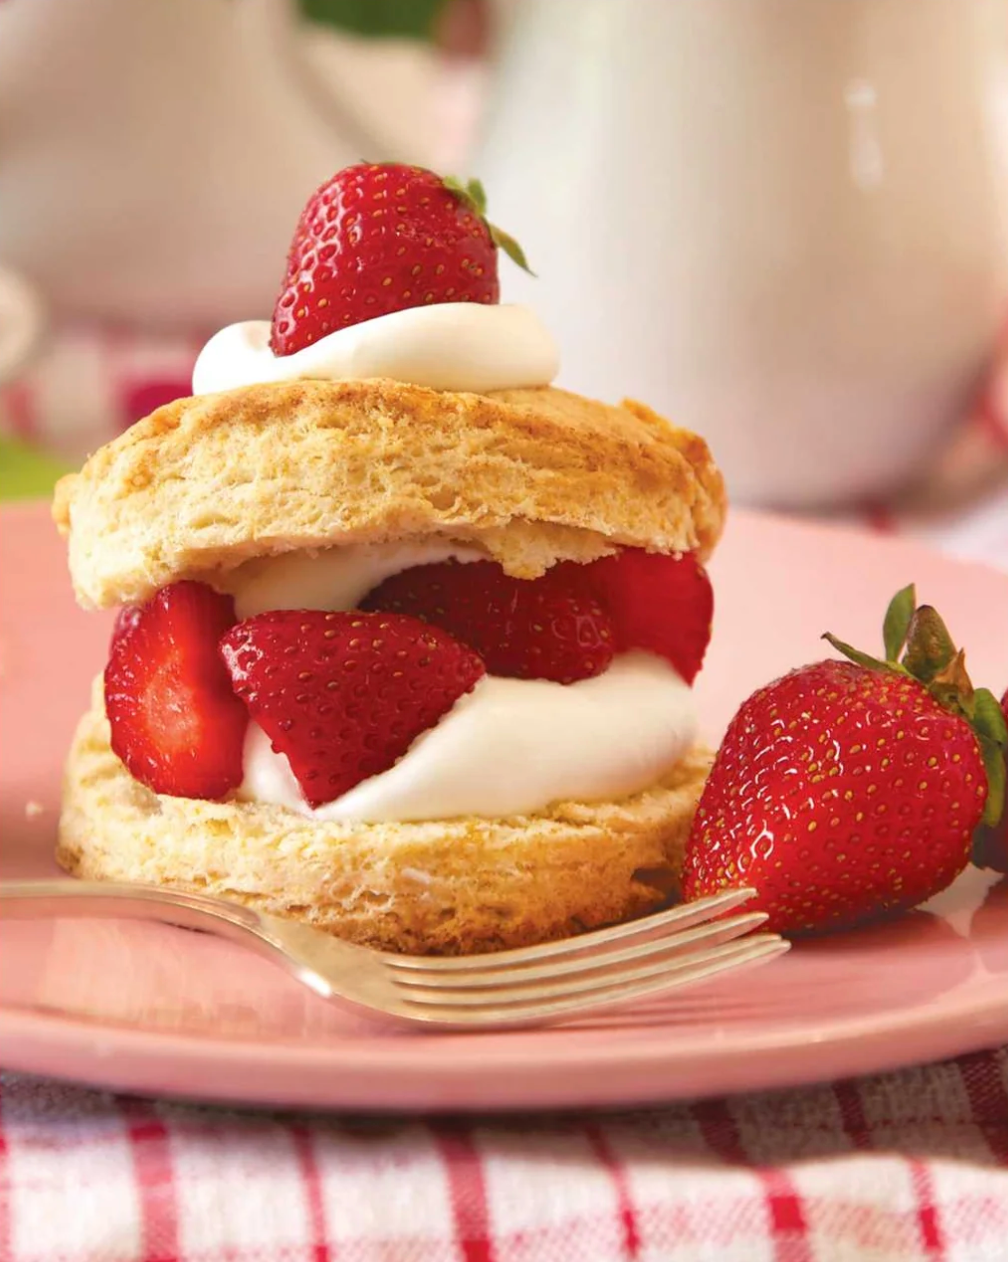 Savor the Flavors of Summer with this Easy Strawberry Shortcake Recipe